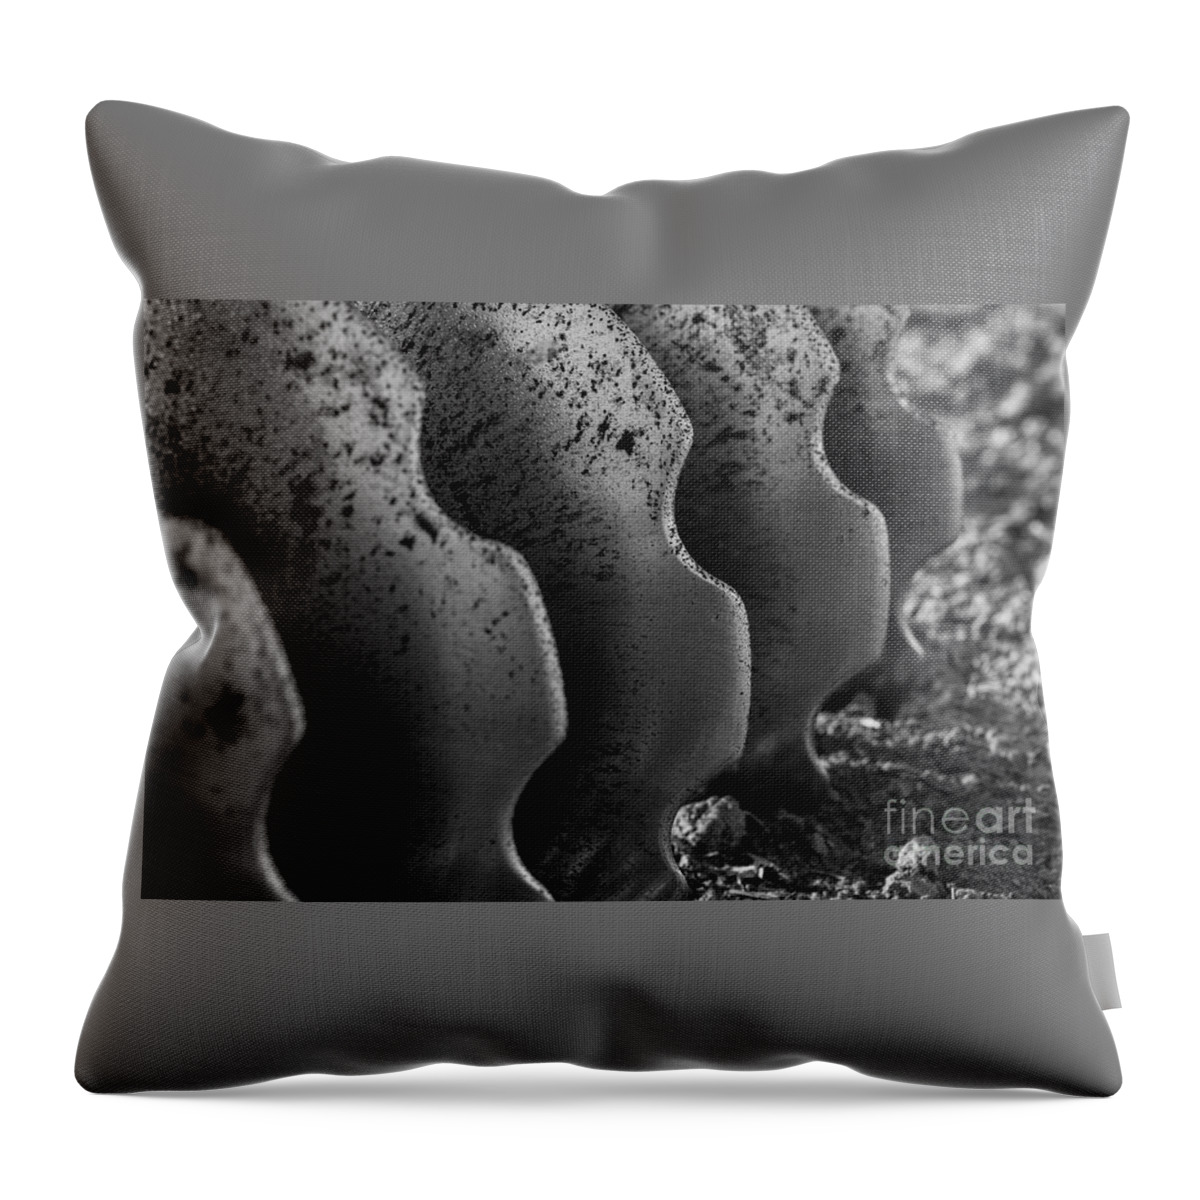 Agriculture Throw Pillow featuring the photograph Farm Equipment Abstracts #6 by Jim Corwin